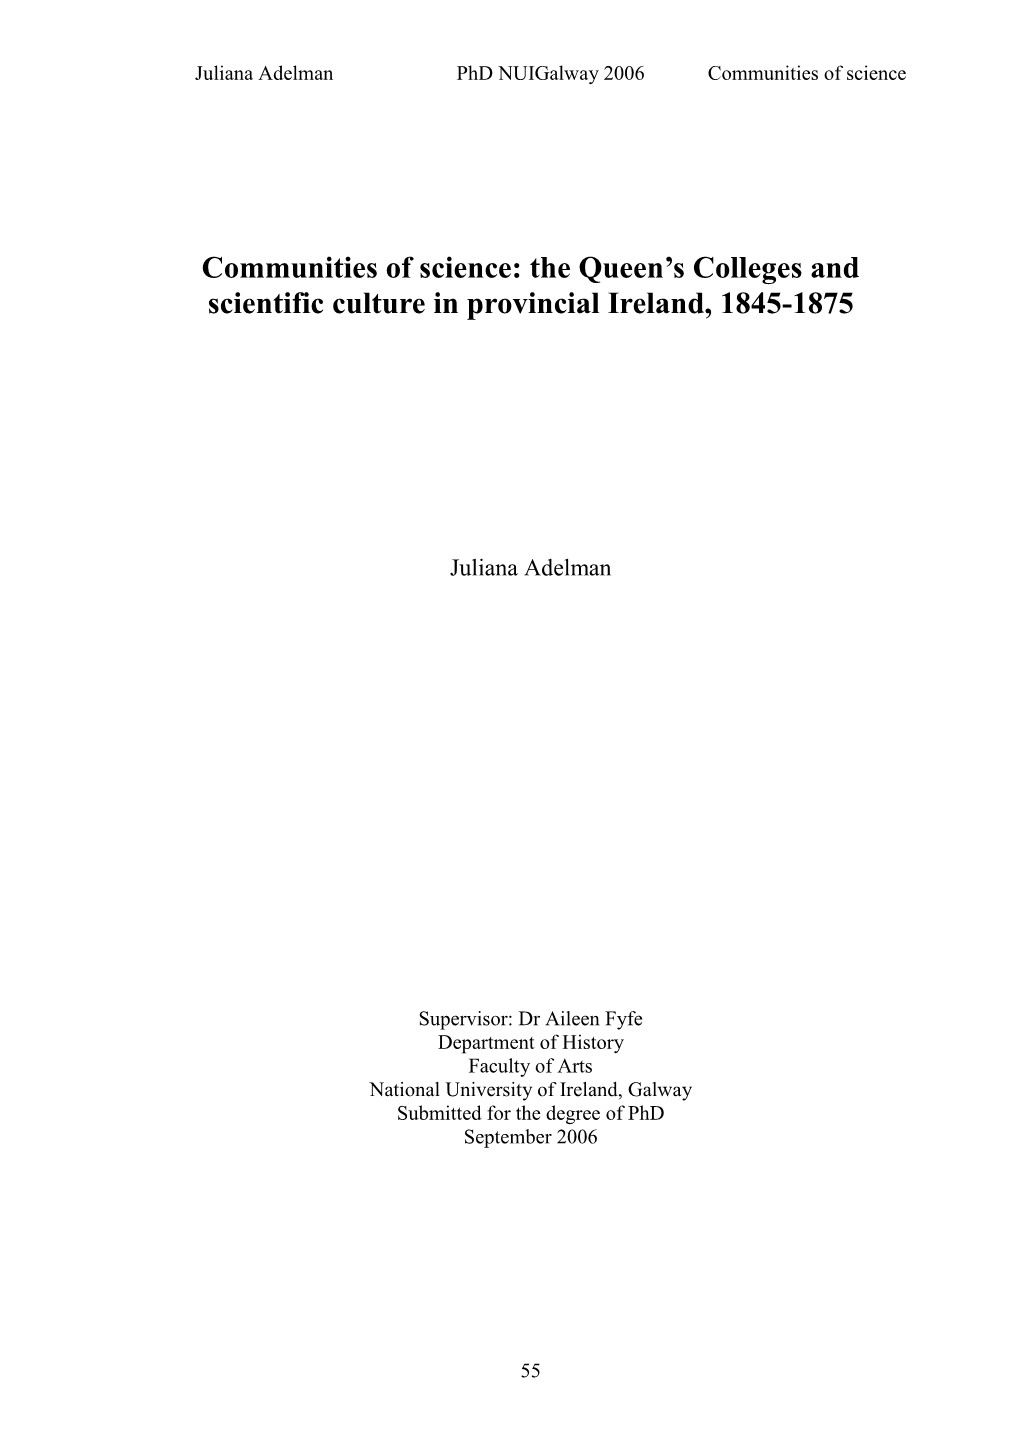 Communities of Science: the Queen's Colleges and Scientific Culture in Provincial Ireland, 1845-75' (Phd, National University of Ireland, Galway, 2006), Pp